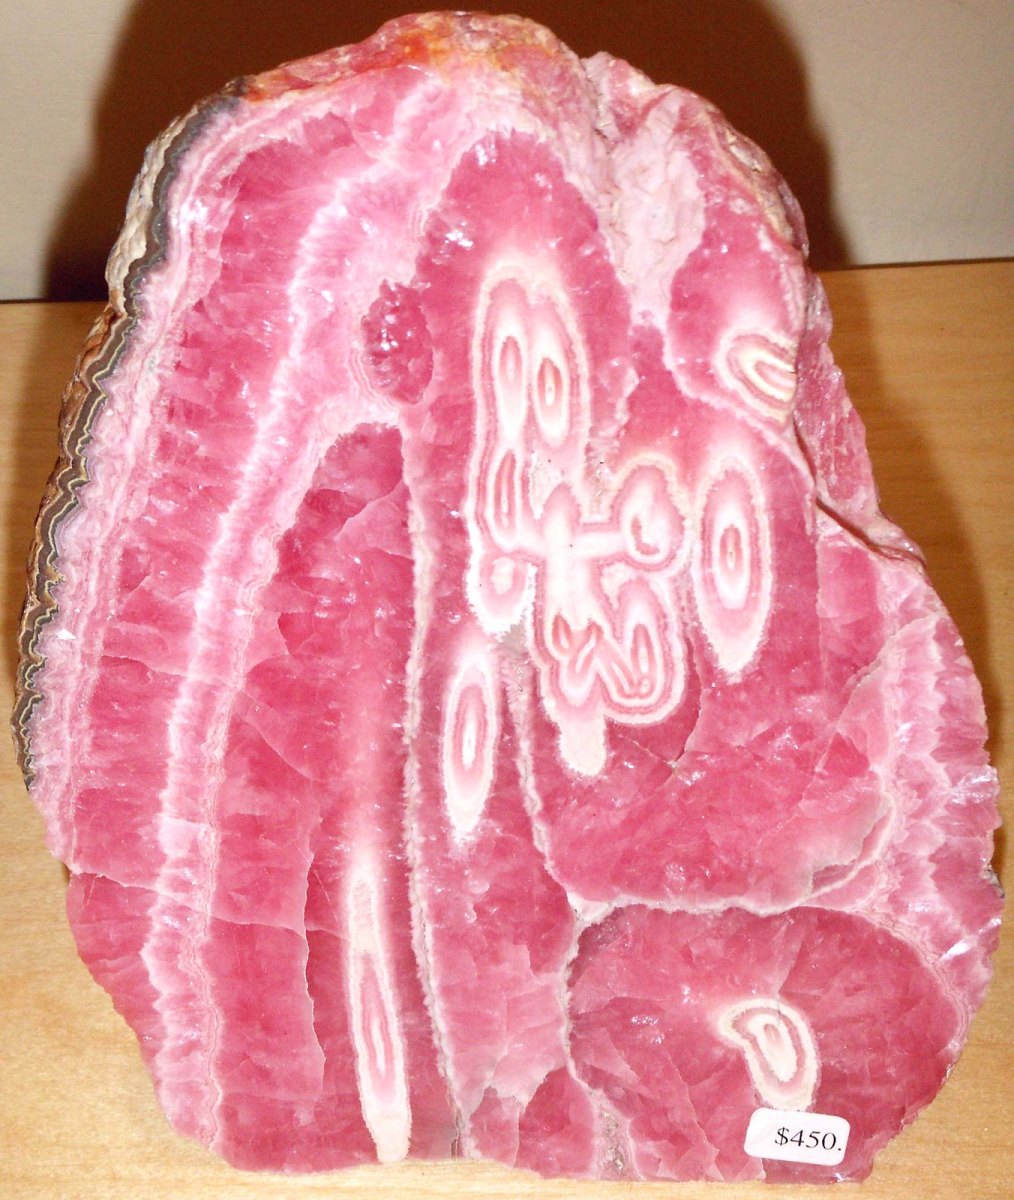 Rhodochrosite is a powerful healer of emotional issues and pain. 